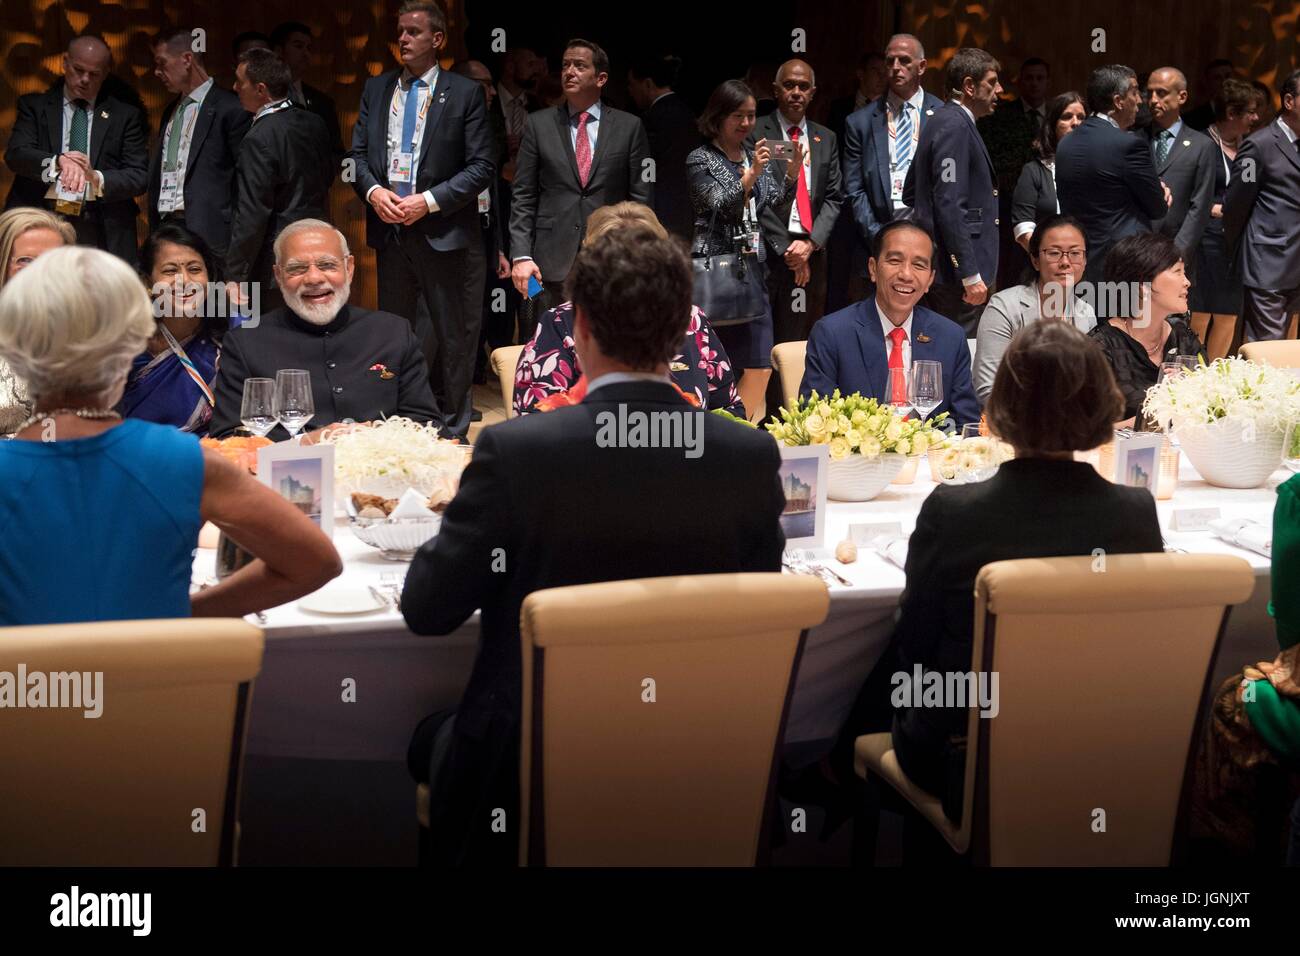 Indian Prime Minister Narendra Modi, left, and Indonesian President Joko Widodo, right, share a laugh with Canadian Prime Minister Justin Trudeau during a dinner for world leaders attending the first day of the G20 Summit meeting at the Elbphilharmonie concert hall July 7, 2017 in Hamburg, Germany.   (Bundesregierung/Bergmann via Planetpix) Stock Photo